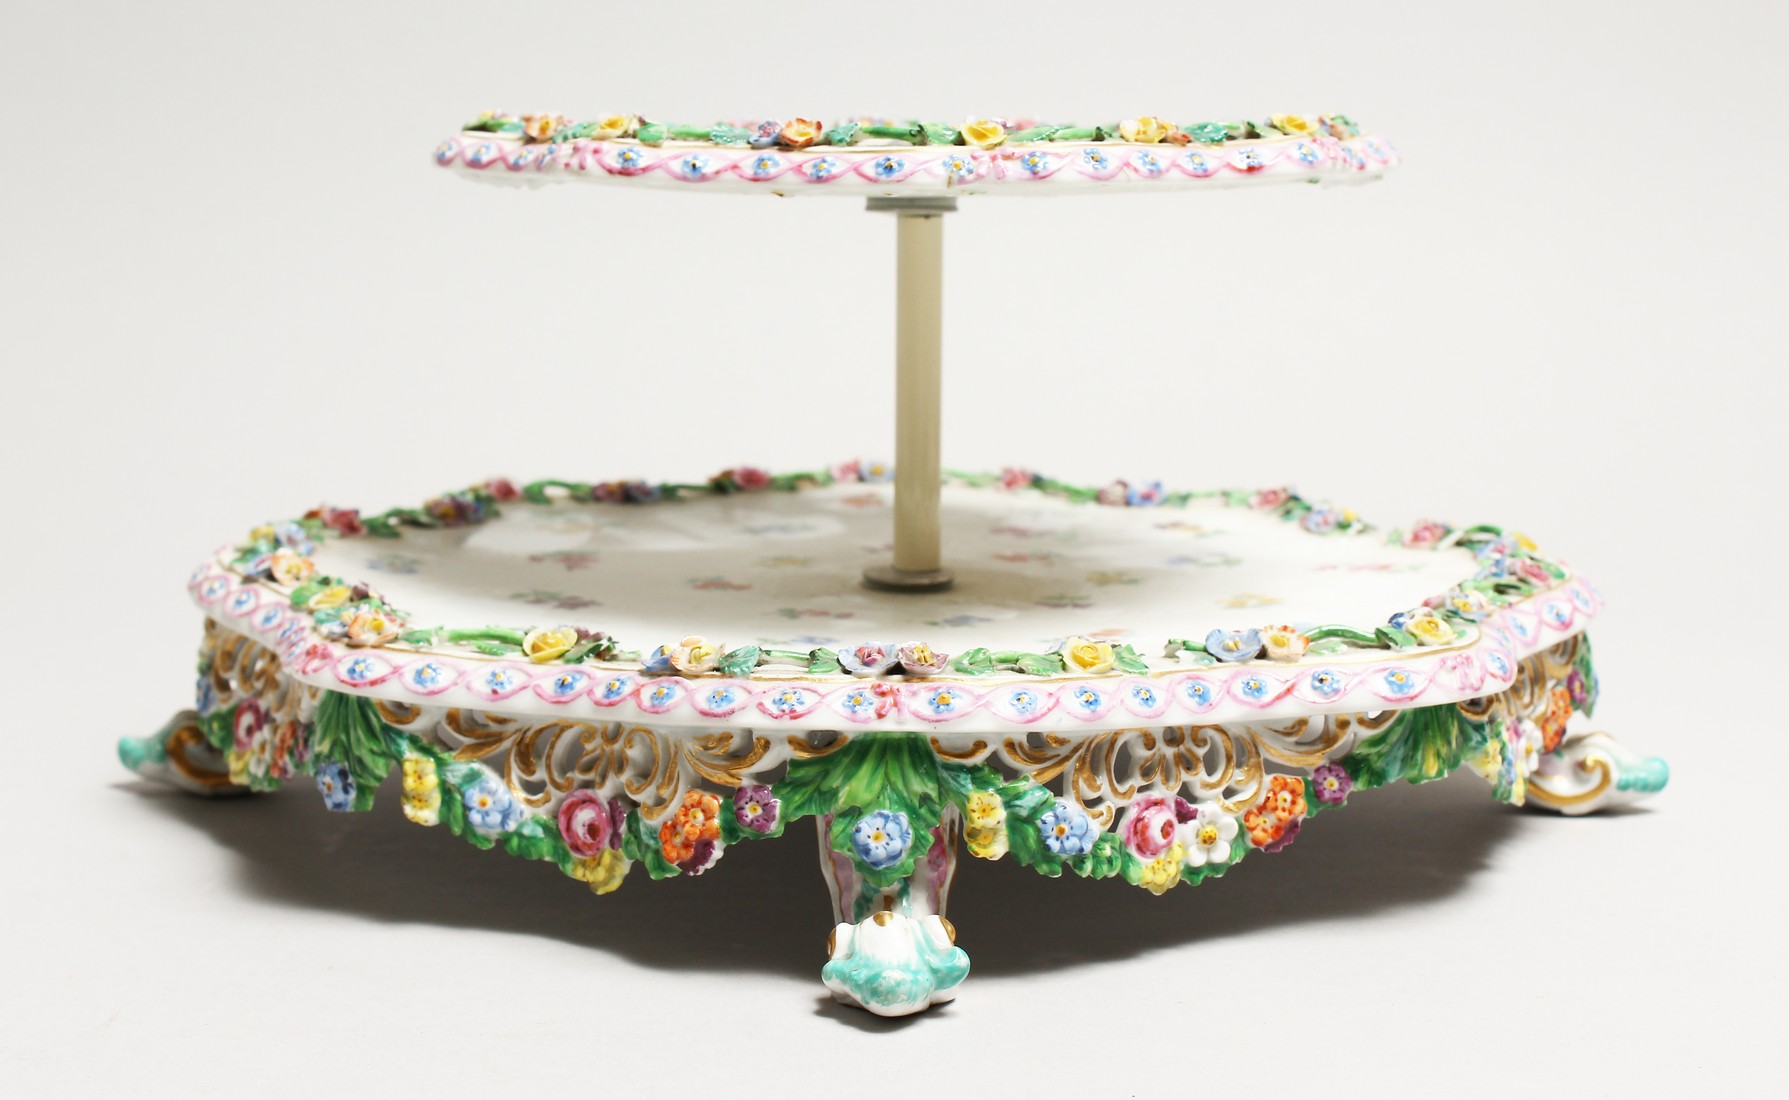 A 19TH CENTURY MEISSEN PORCELAIN TWO TIER STAND painted with roses and encrusted with flowers. Cross